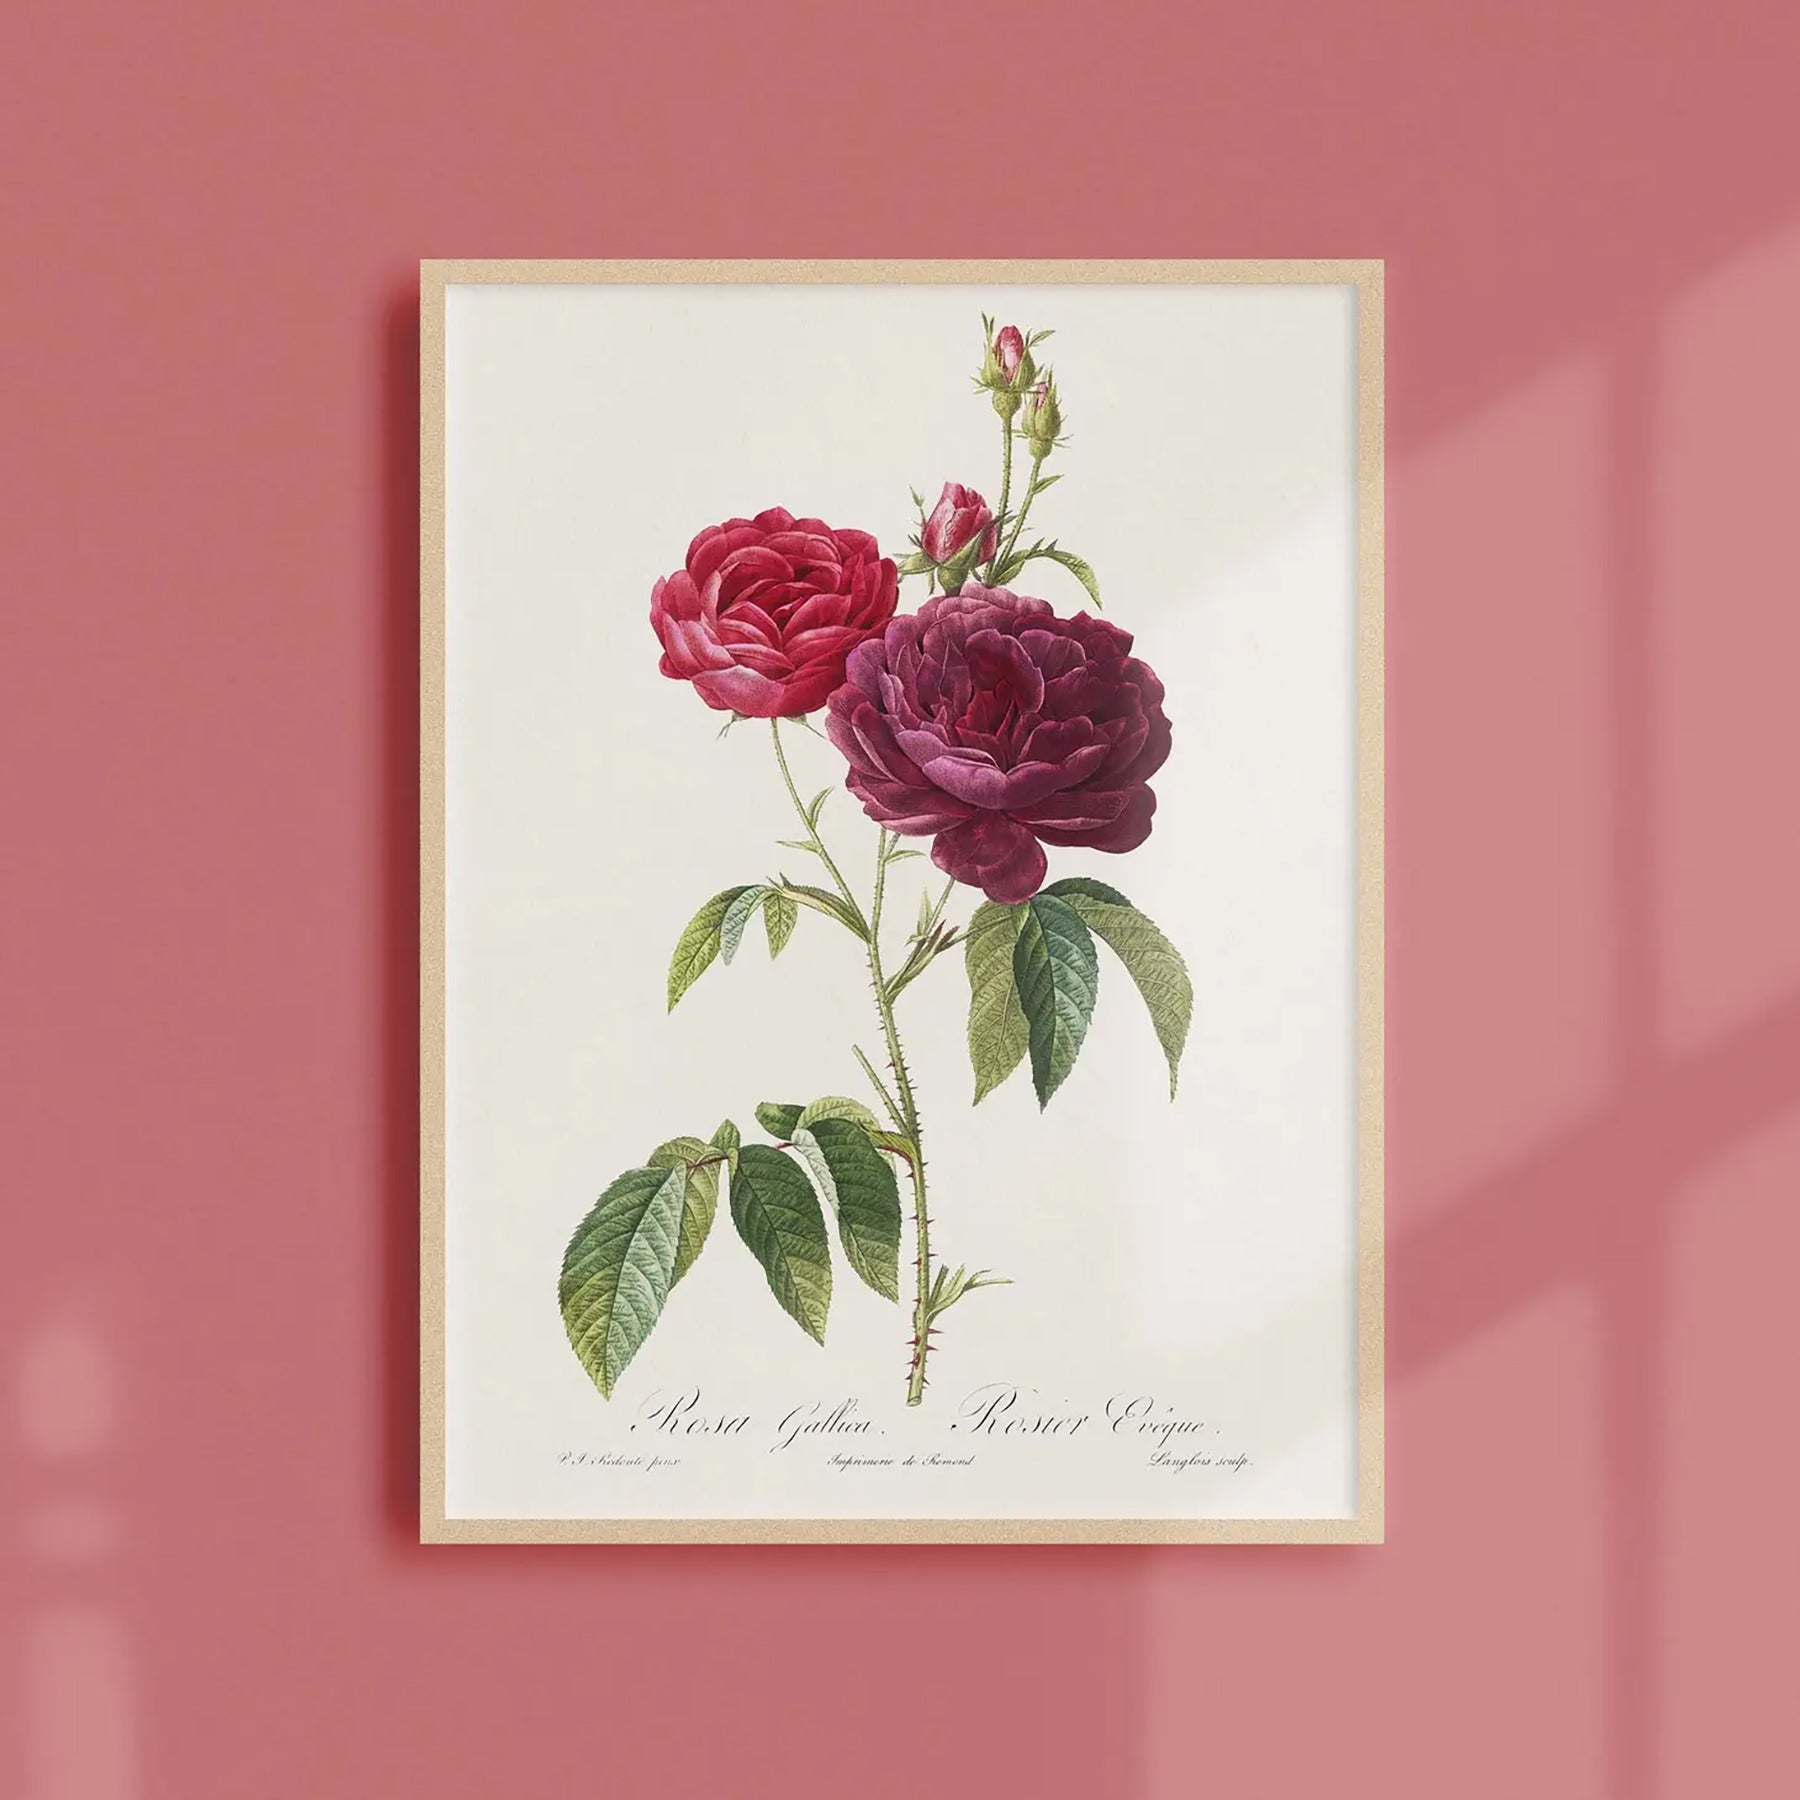 Reproduction of a botanical drawing from the book "les roses" published in 1817 and illustrated by the famous painter and botanist pierre-joseph redouté. Generosa Home and Living